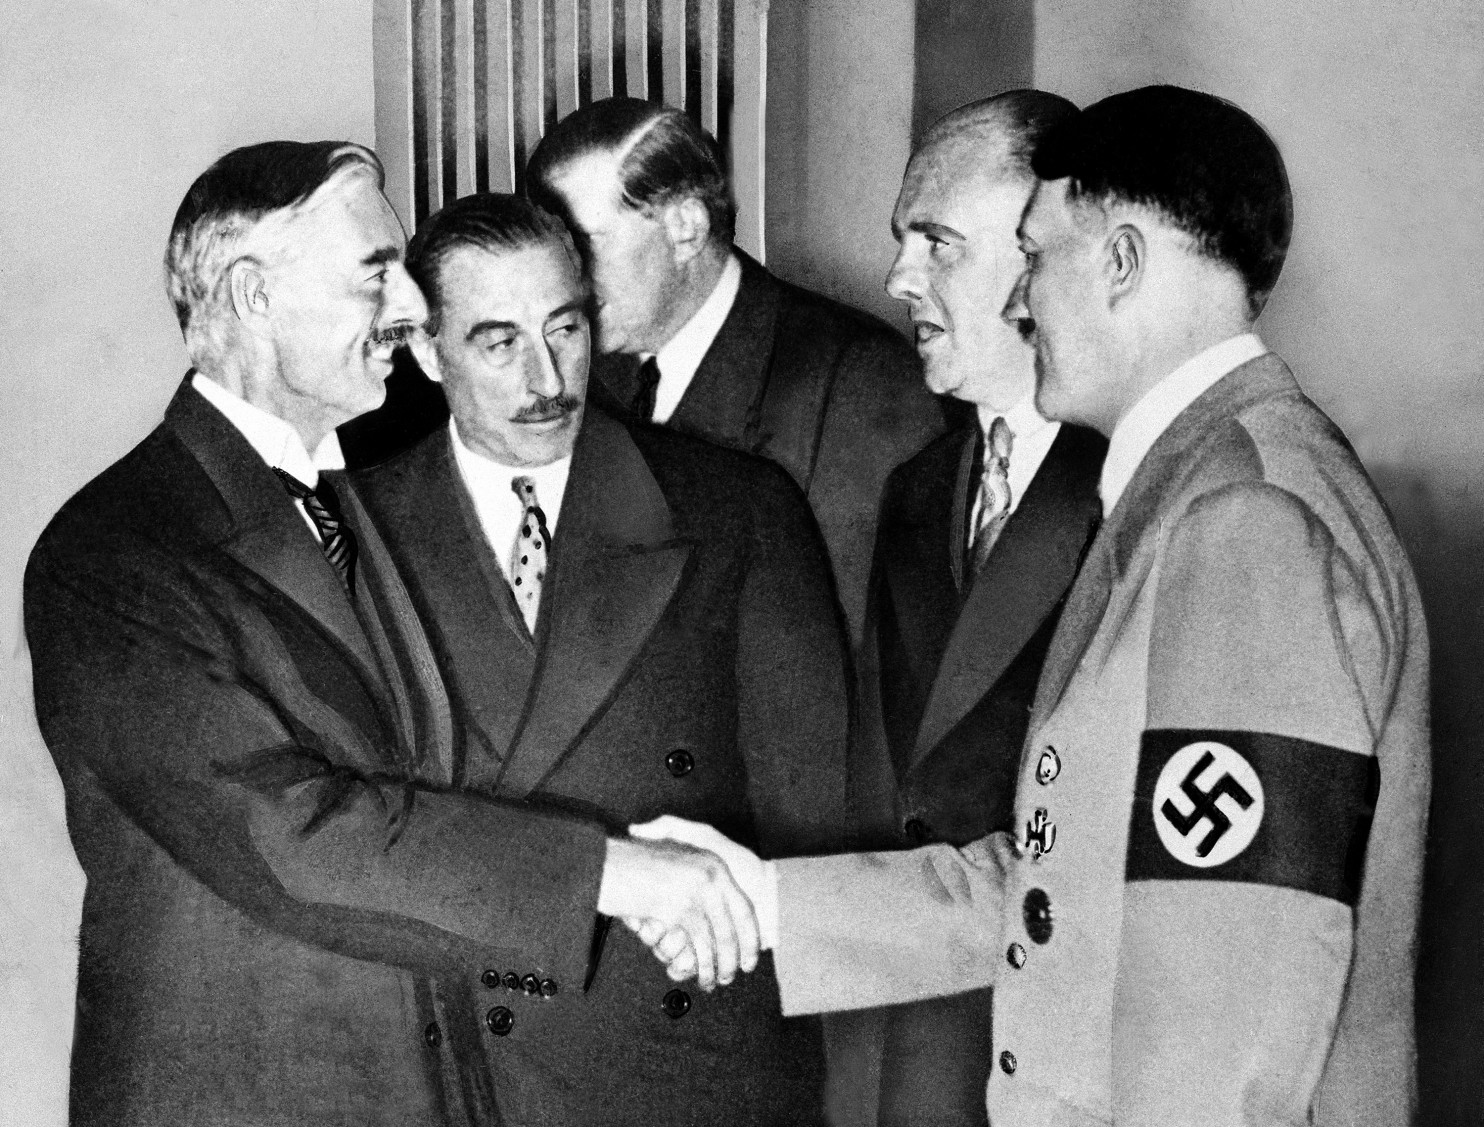 Hands clasped in friendship, Adolf Hitler and England's Prime Minister Neville Chamberlain, are shown in this historic pose at Munich on Sept. 30, 1938. This was the day when the premier of France and England signed the Munich agreement, sealing the fate of Czechoslovakia. Next to Chamberlain is Sir Neville Henderson, British Ambassador to Germany. Paul Schmidt, an interpreter, stands next to Hitler. (Image: AP)